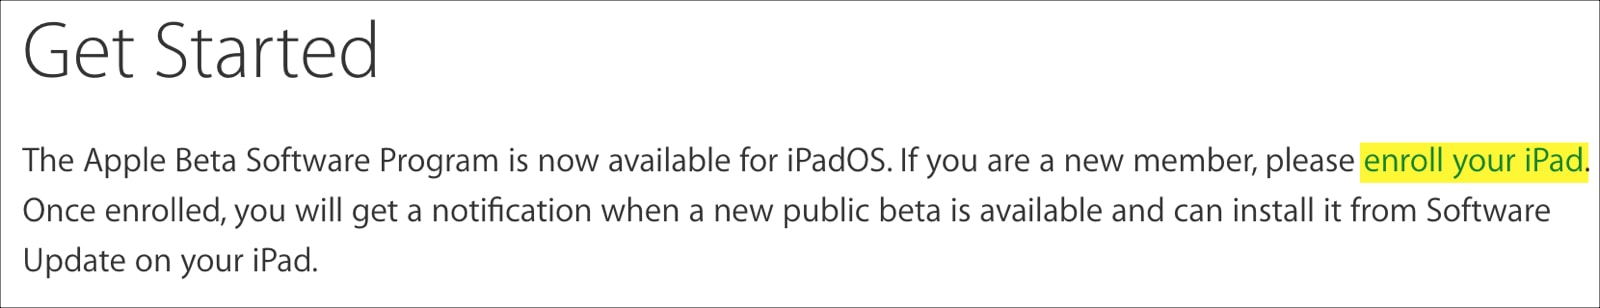 Get Started Enroll Device for Public Betas